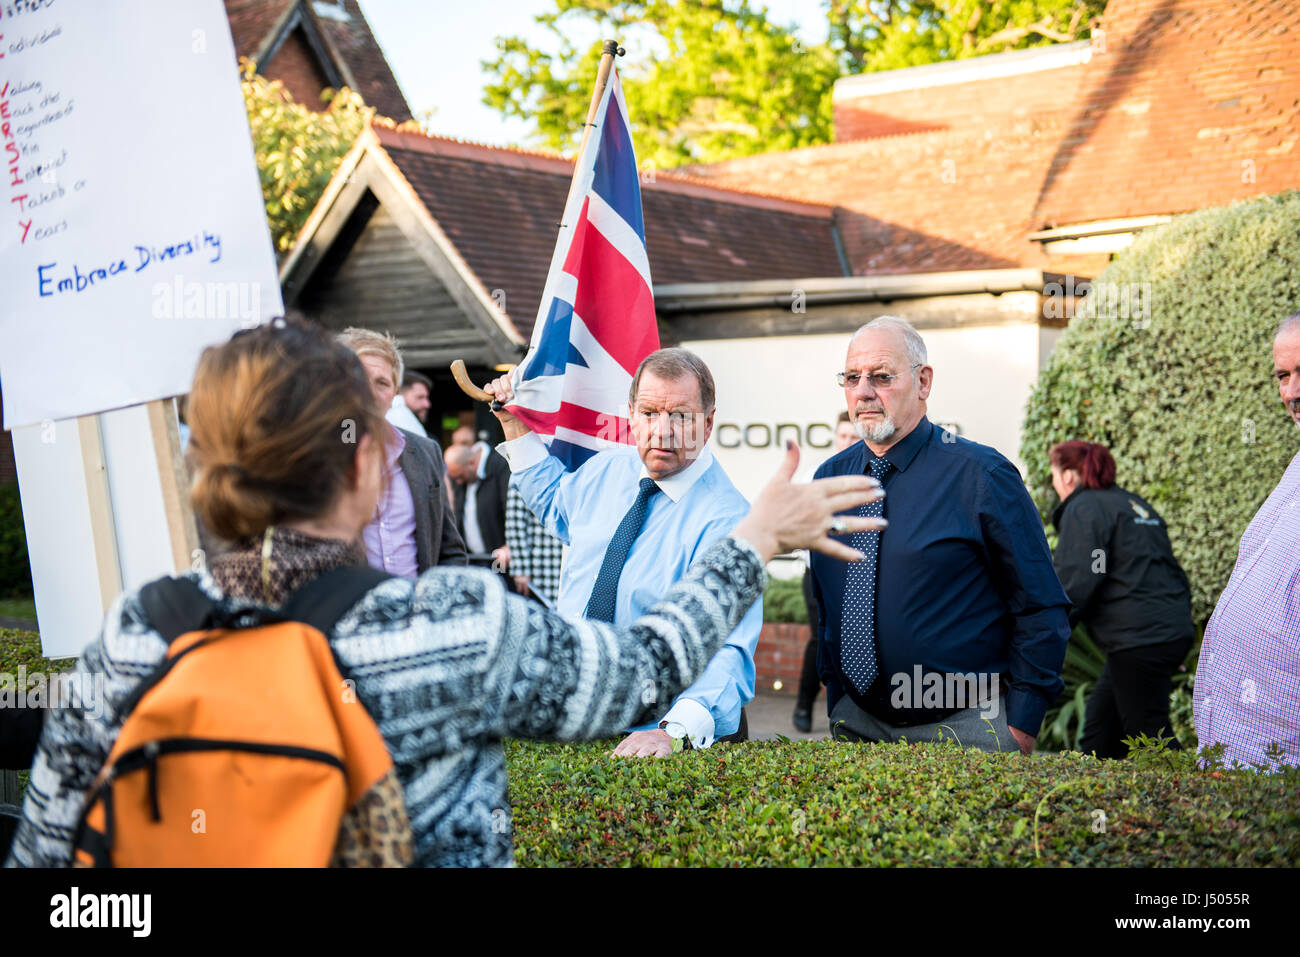 The Concorde Club, Eastleigh, Hampshire, United Kingdom. 14th May, 2017. Southampton Stand Up to Racism activists and supporters protest at the Concorde Club where UK politician and former UKIP leader, Nigel Farage holds an evening questions and answers event about his life. Credit: Will Bailey/Alamy Live News Stock Photo